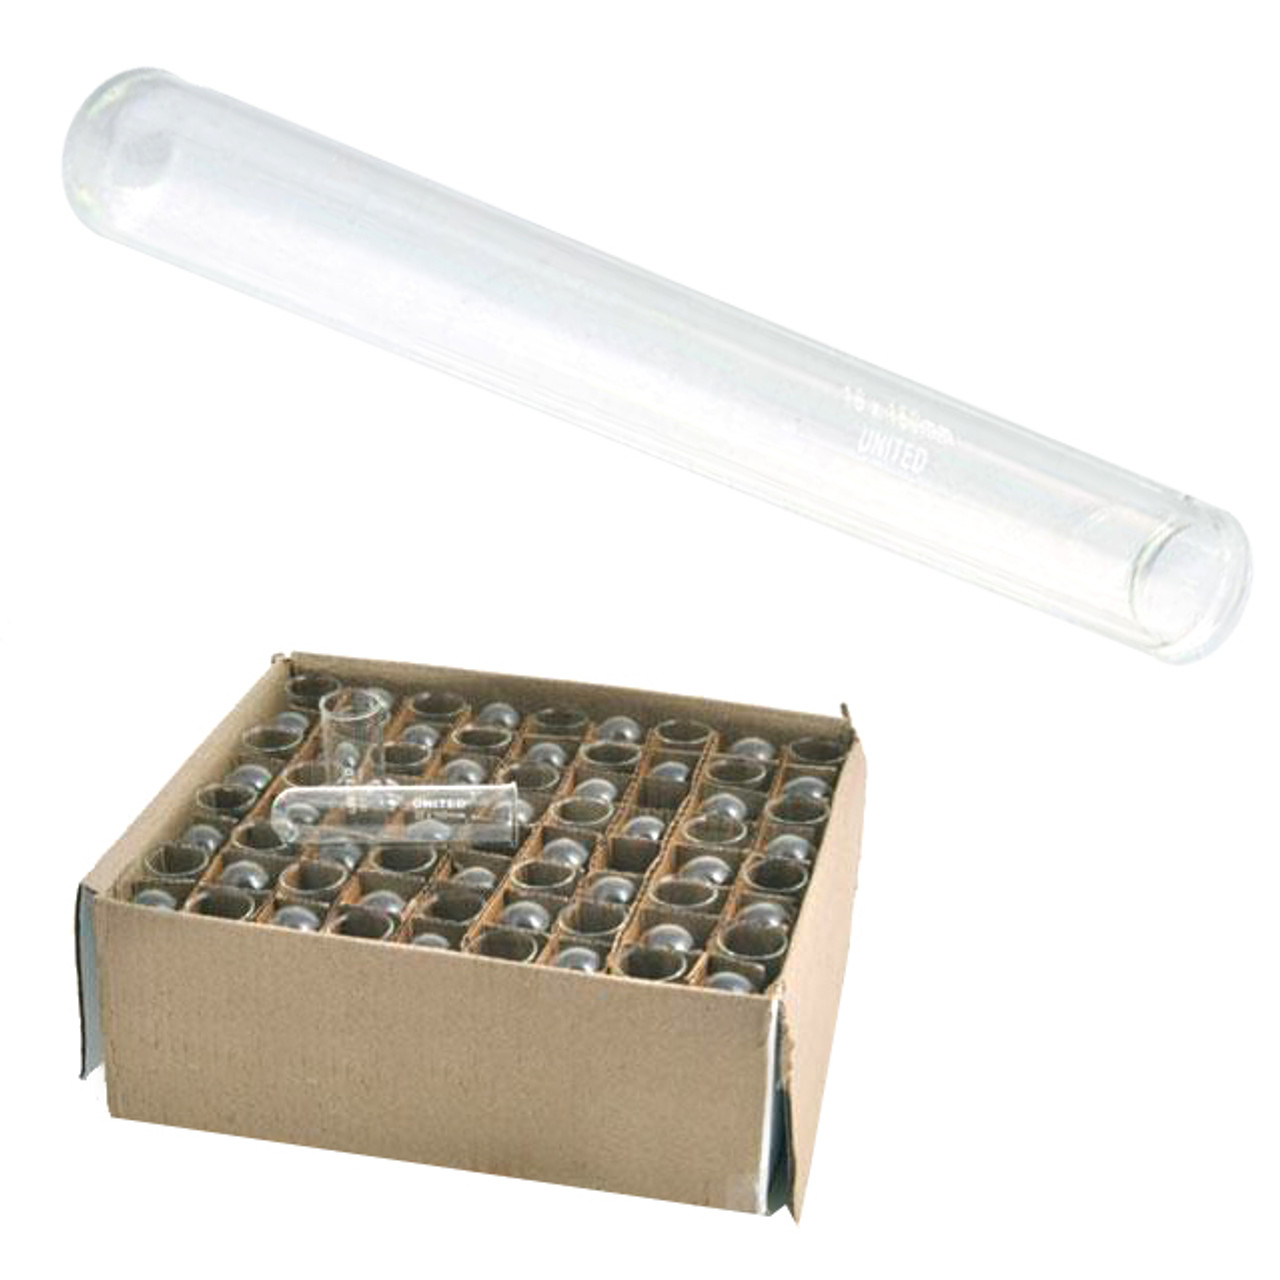 Pre-Cleaned Glass Test Tubes with Rim, 18 x 150mm, case/720